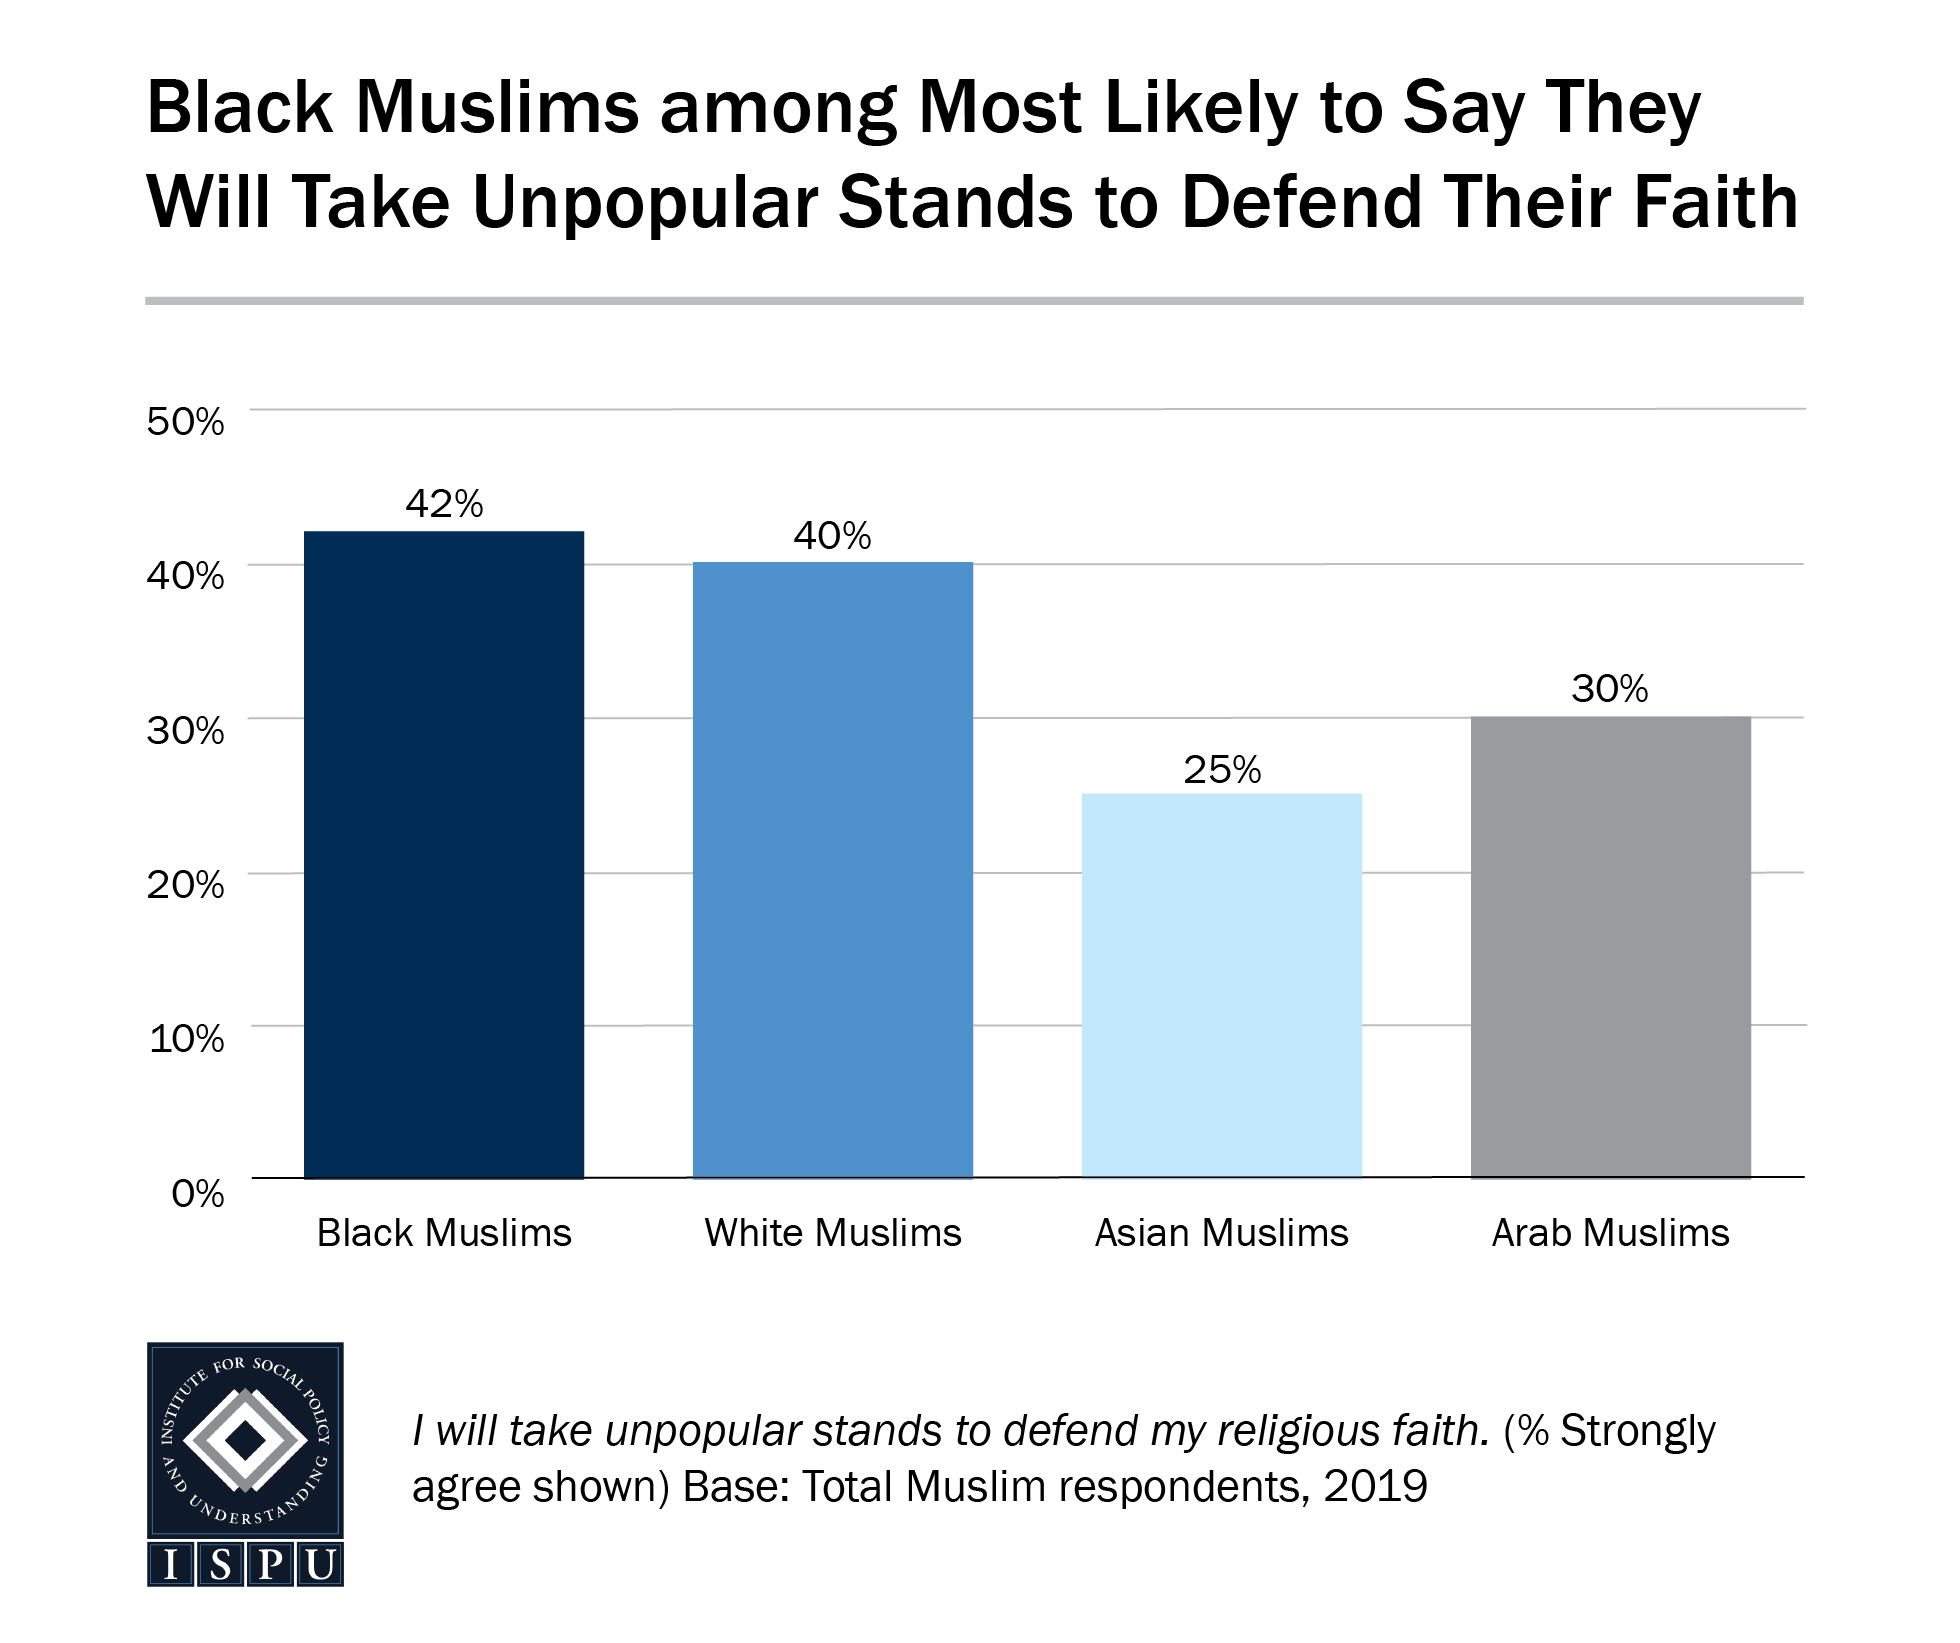 A bar graph showing that Black Muslims are among the most likely to say they will take unpopular stands to defend their faith